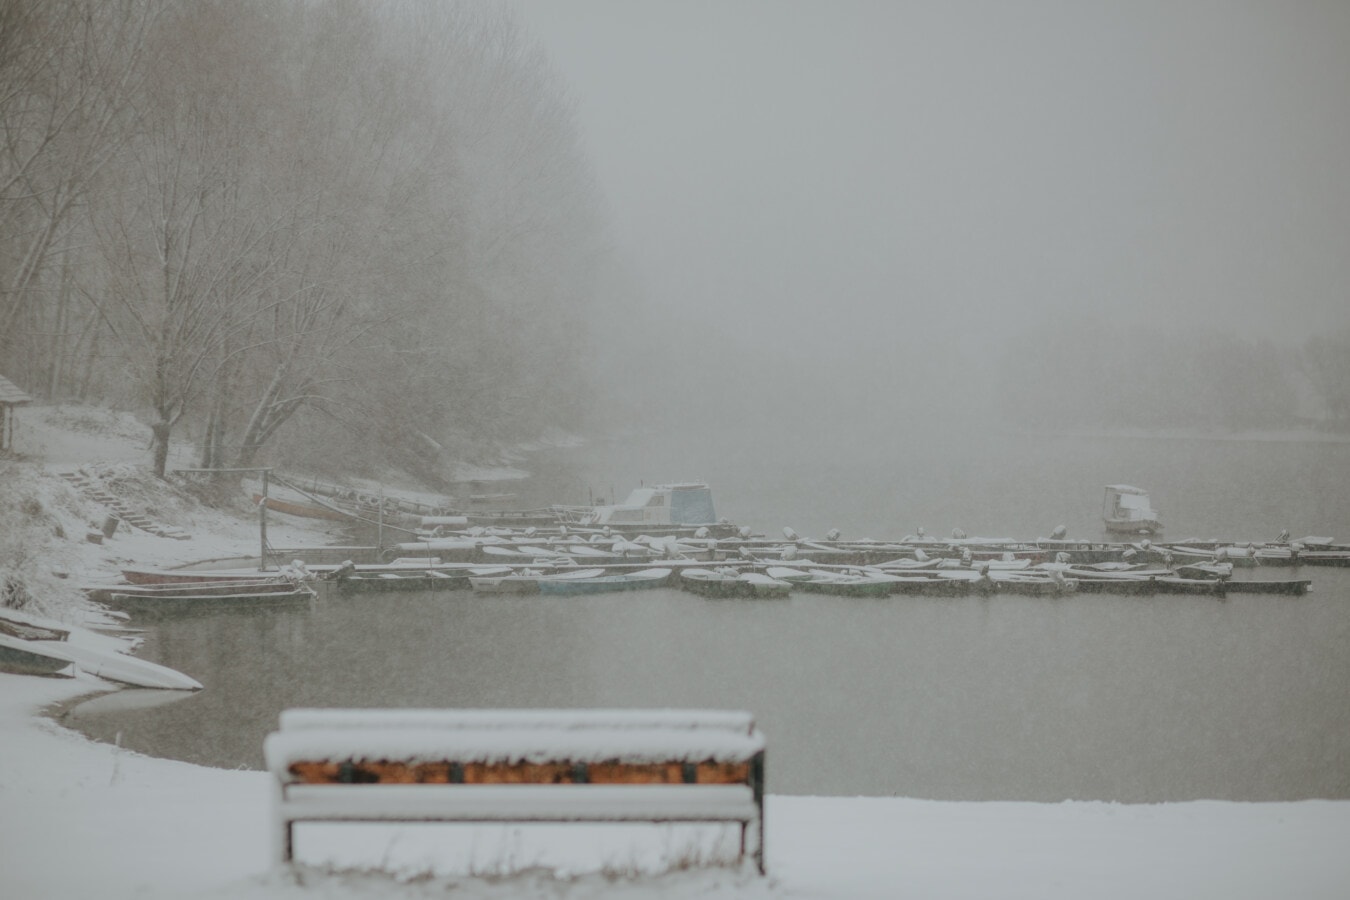 lakeside, cold water, snowy, snowstorm, riverbank, harbor, snowflakes, foggy, mist, fog